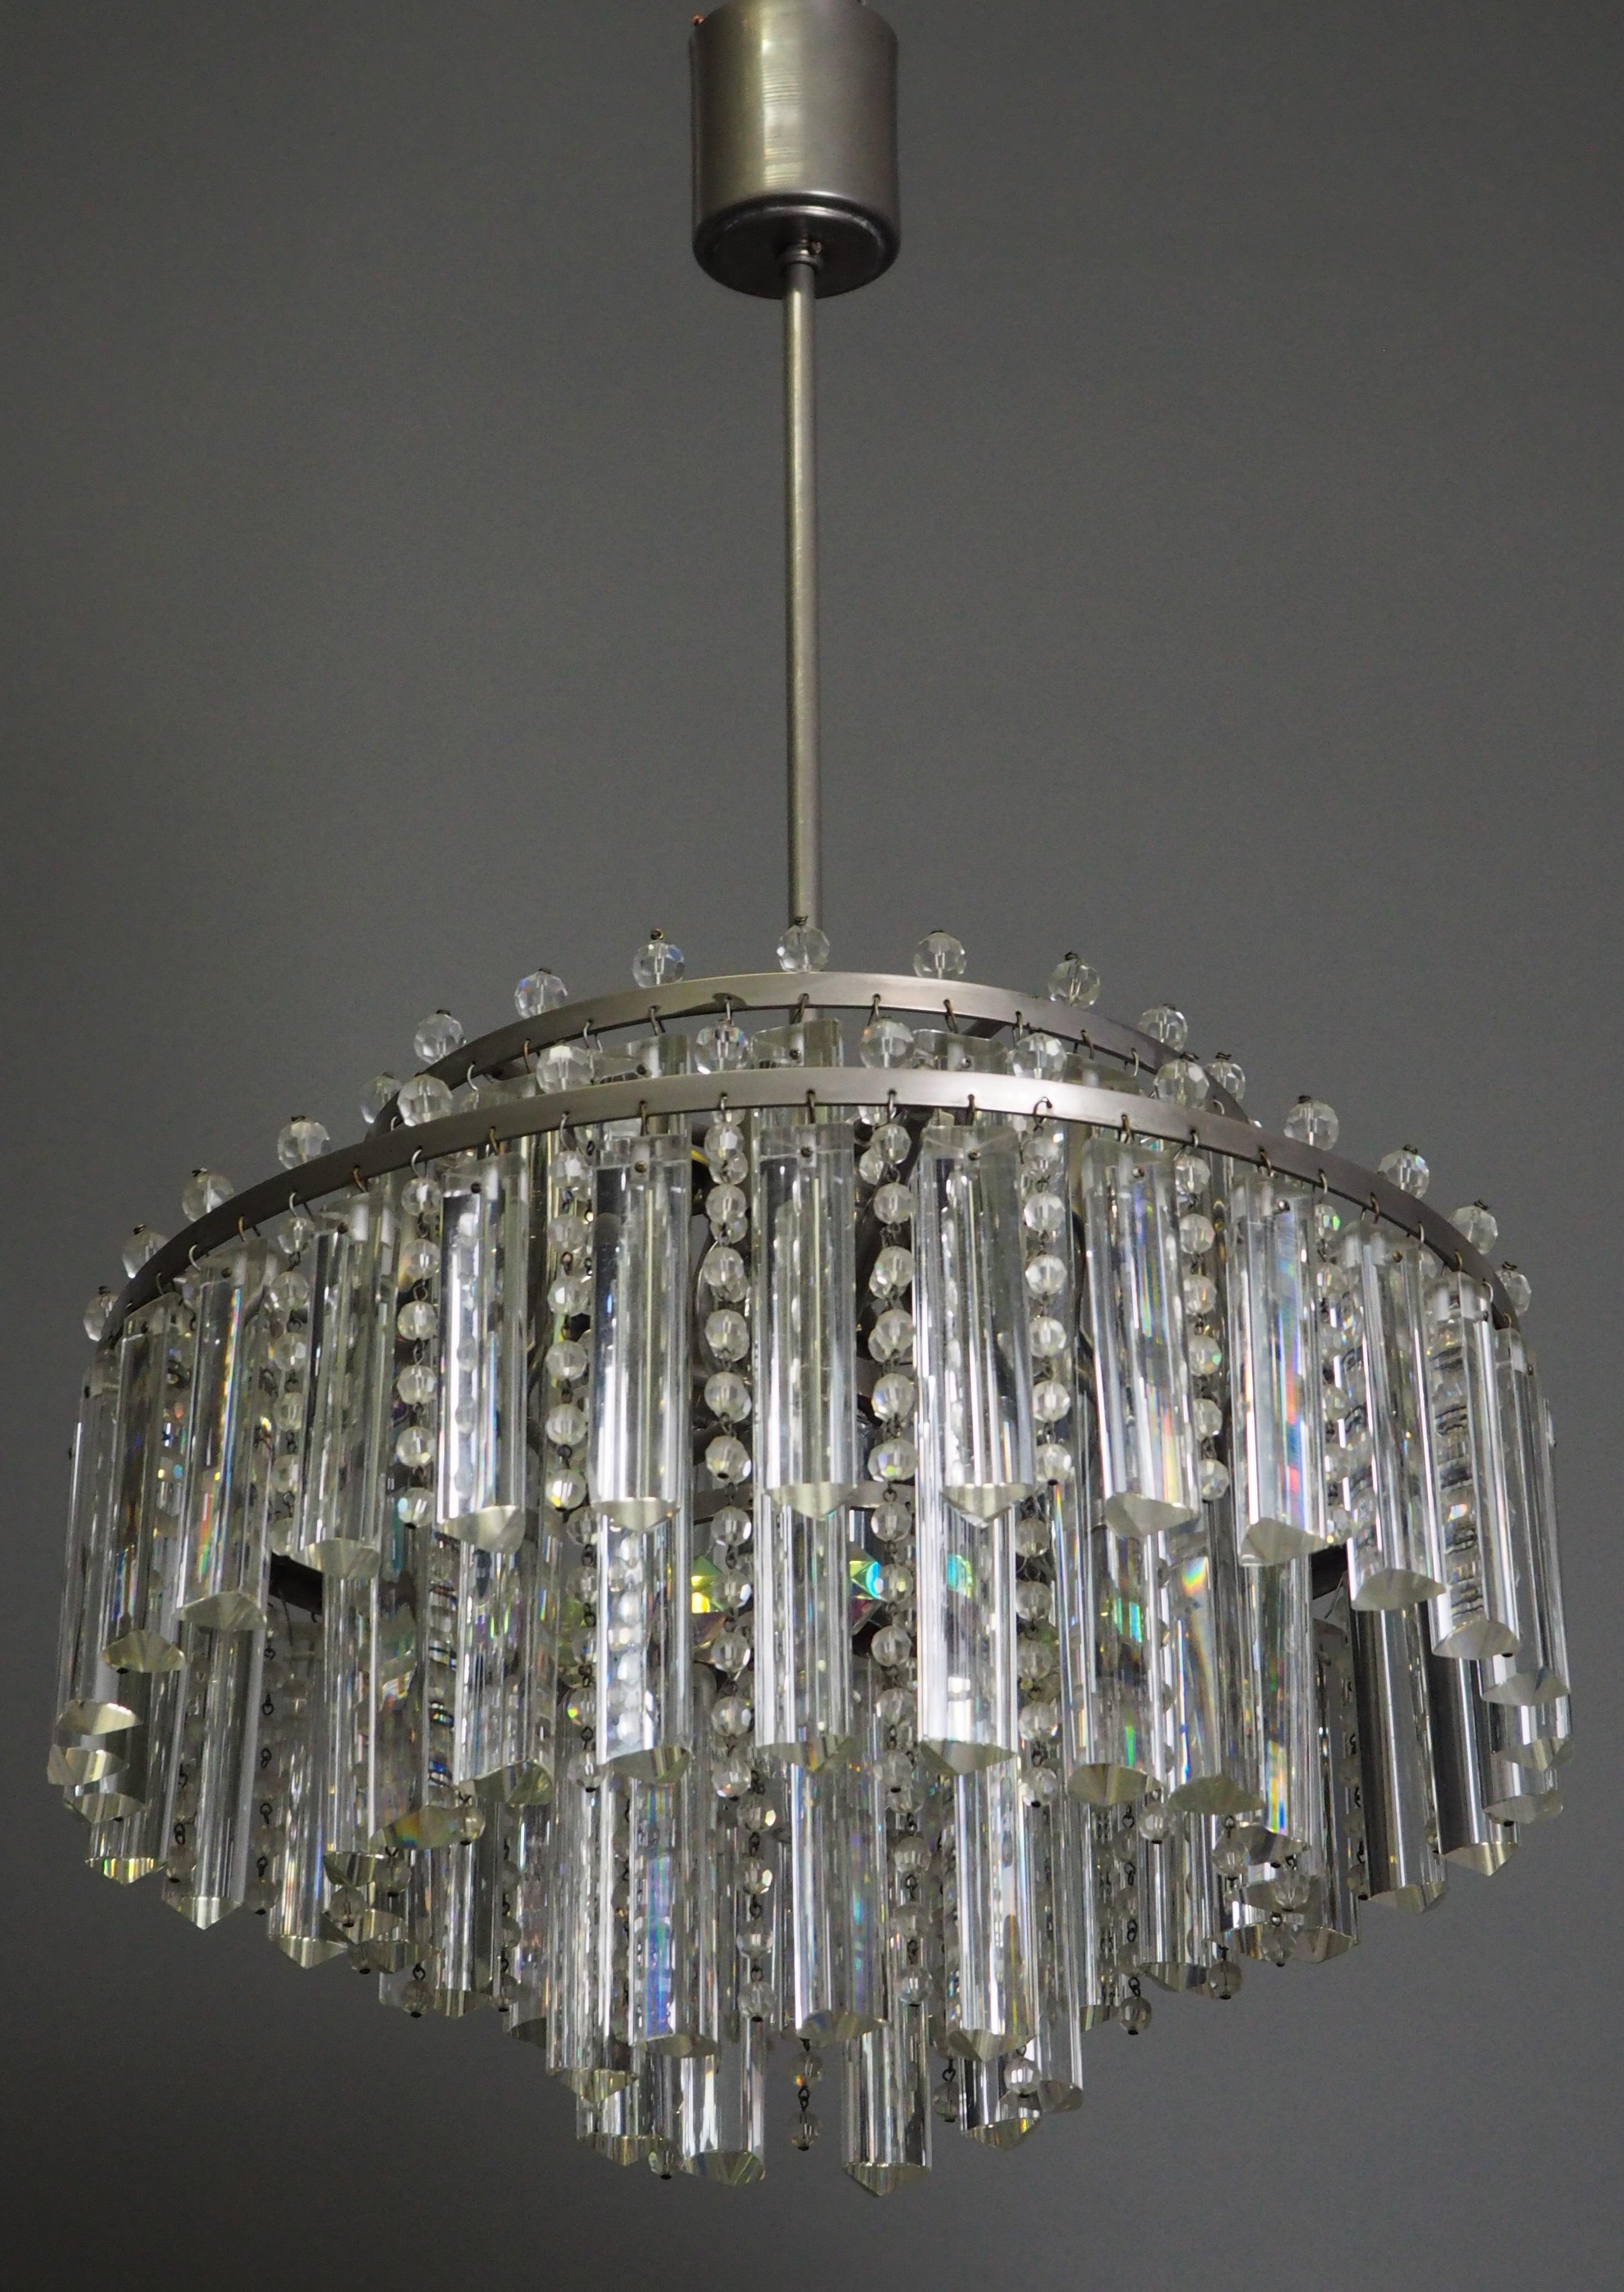 A very rare model of three-tiered six-light glass chandeliers by Palwa, circa 1960s.
The fixtures are made of silver color patinated and heavy triangular glass rods and strass - prism.
Floodlight prisms give this chandelier a striking shape; only